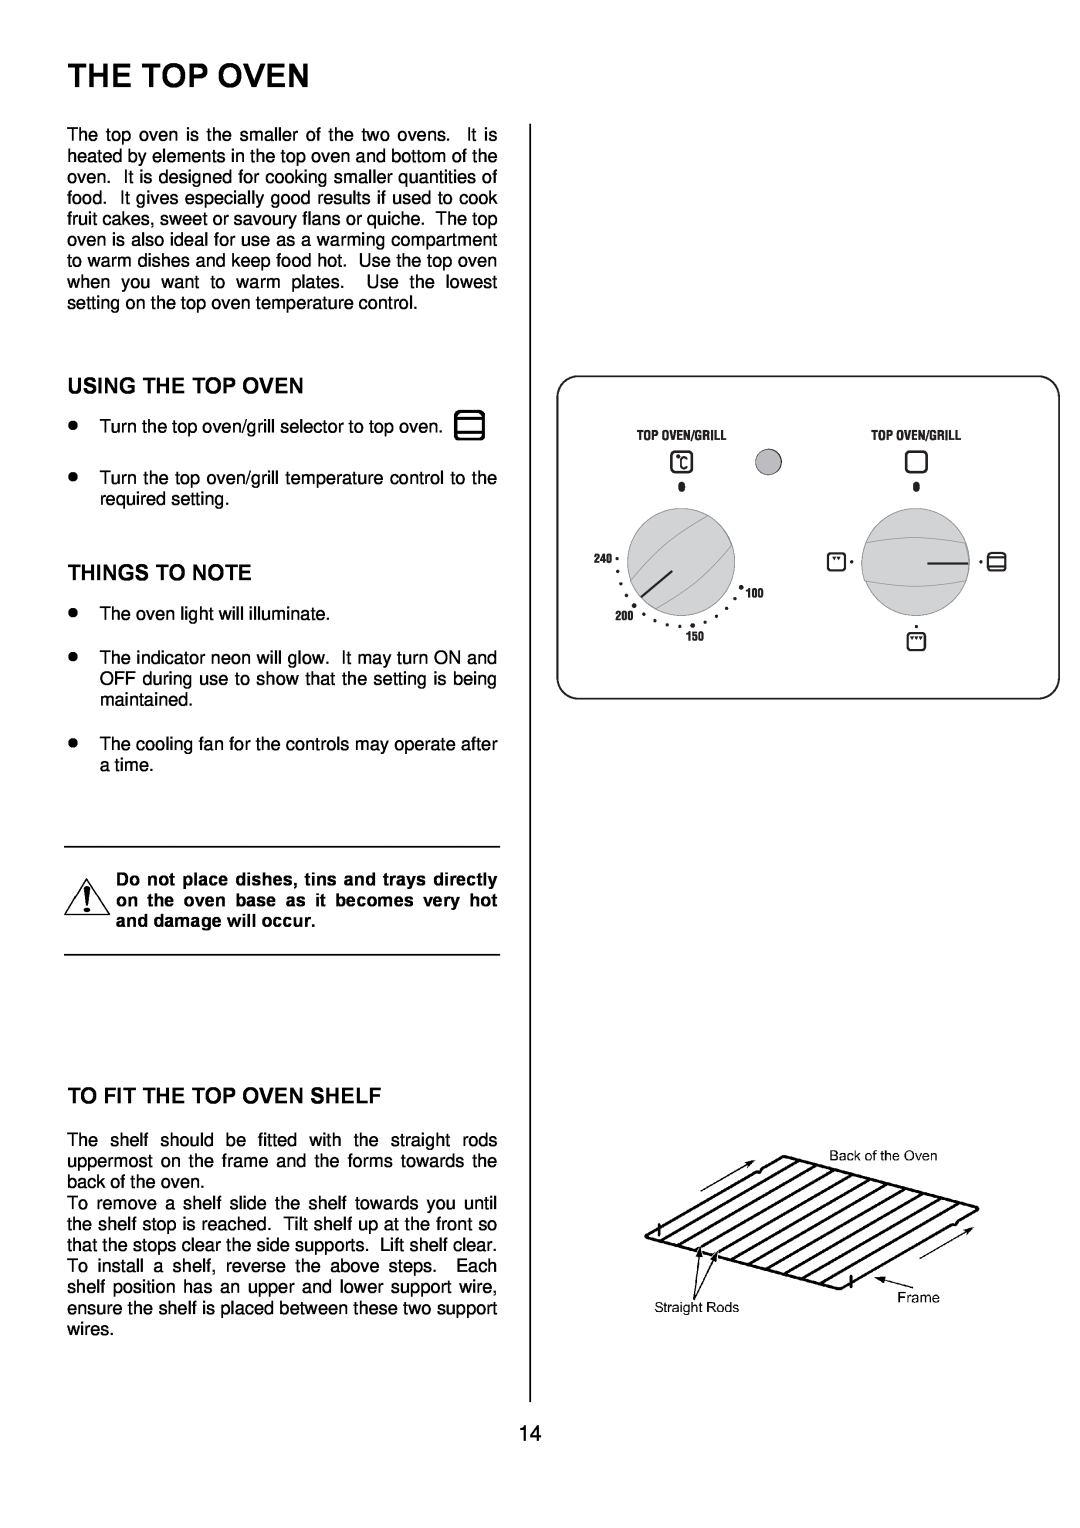 Zanussi ZOD 890 manual Using The Top Oven, To Fit The Top Oven Shelf, Things To Note 